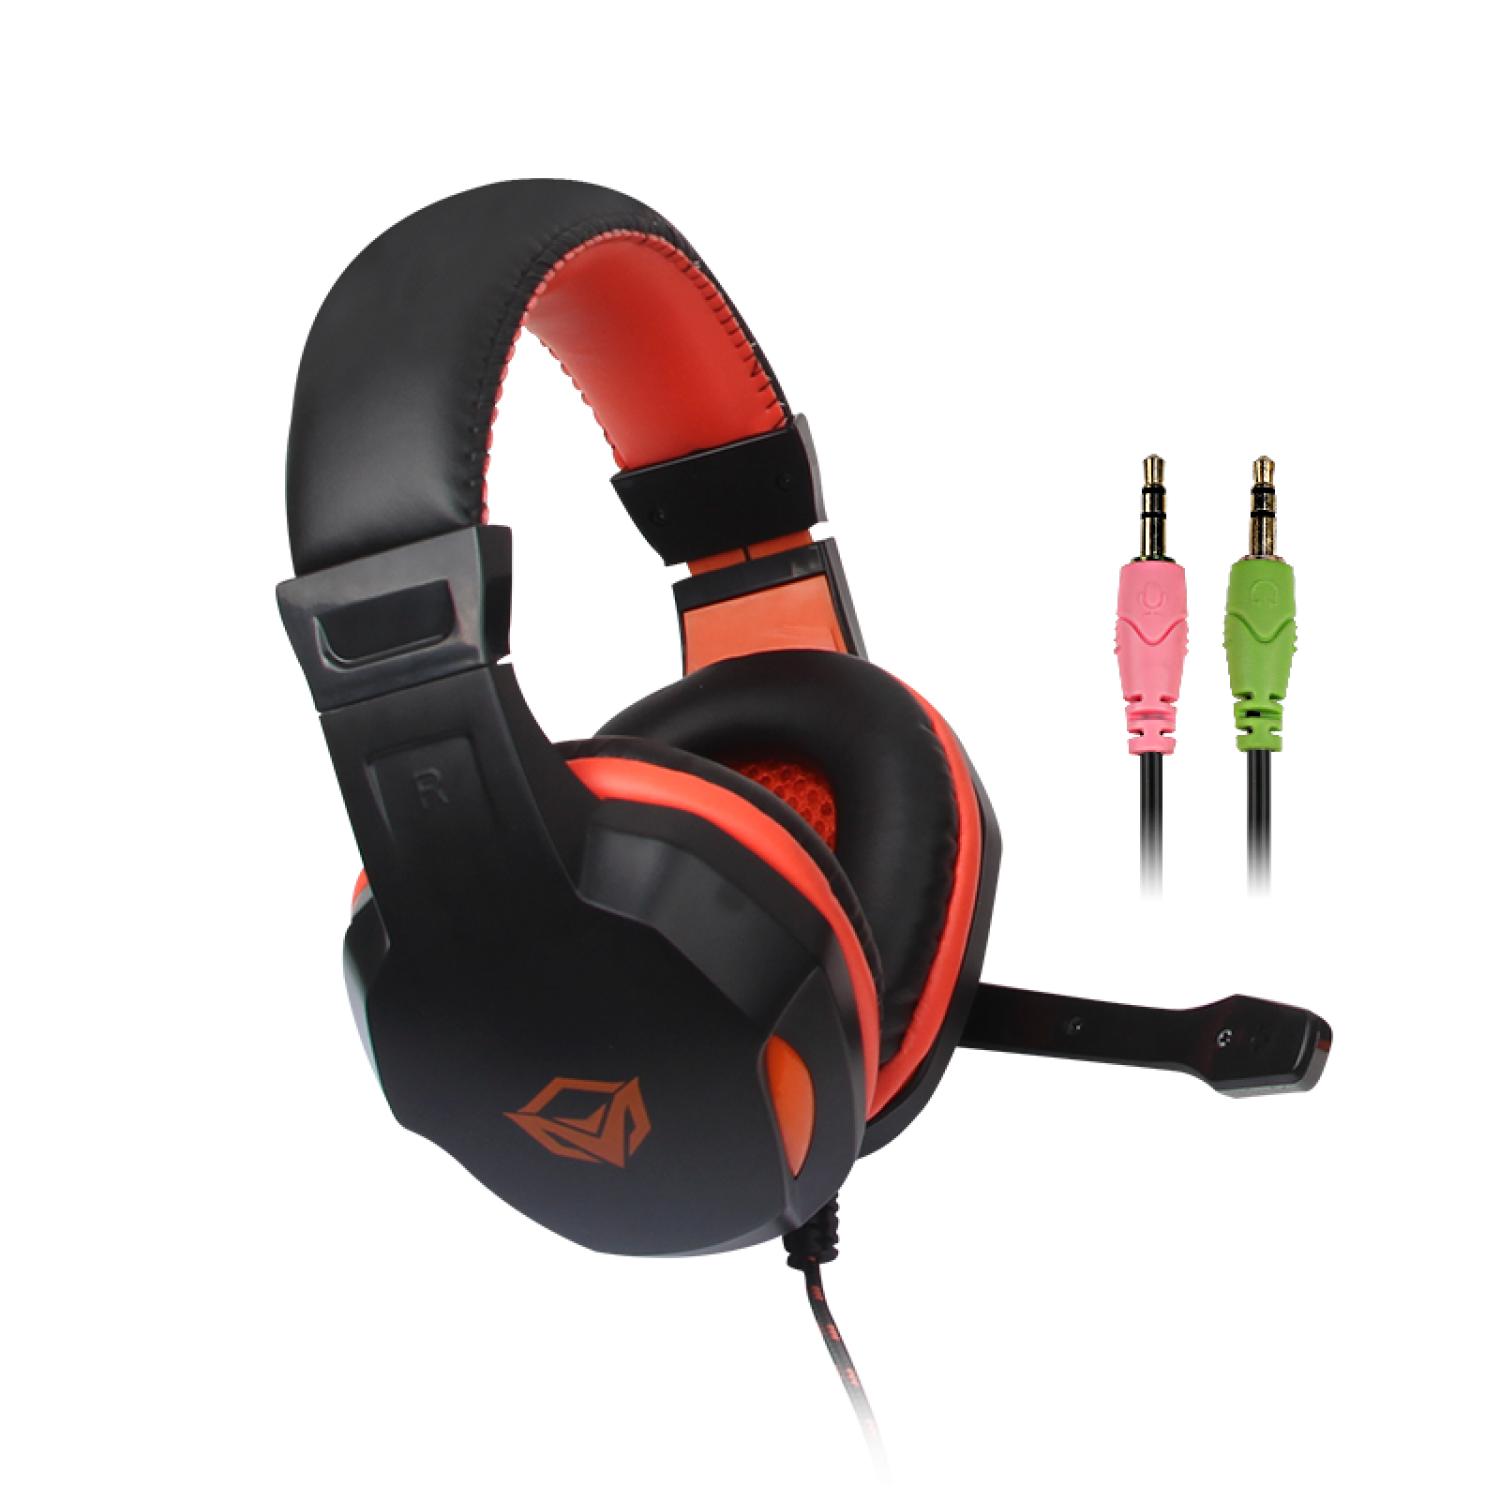 Meetion Headphone Noise Canceling Stereo Leather Wired For Gaming, HP010